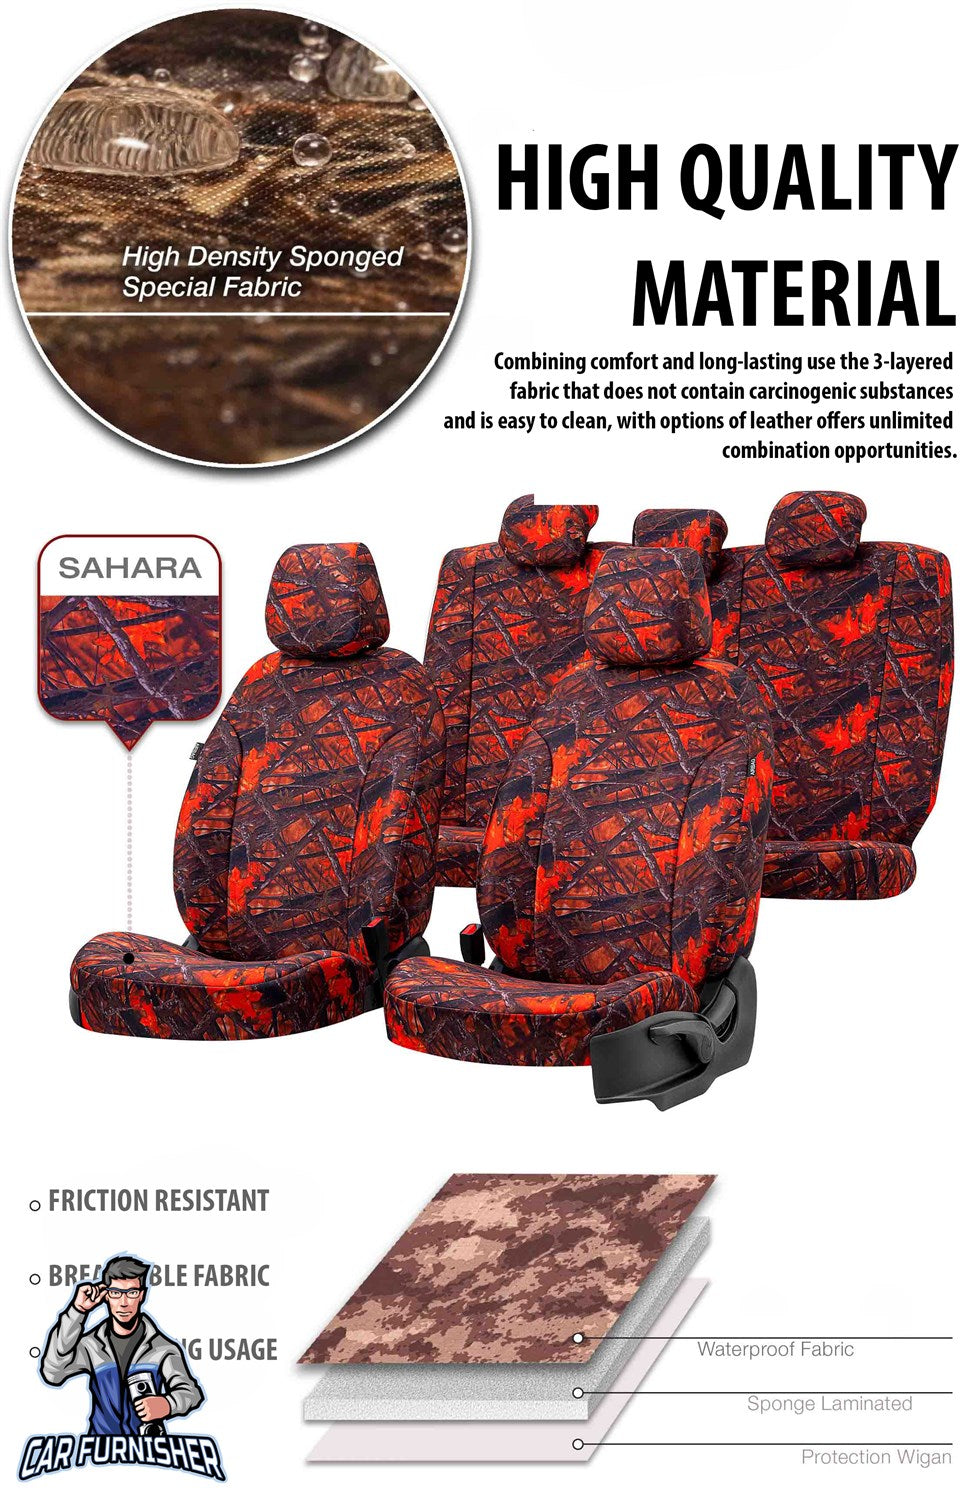 Opel Vectra Seat Covers Camouflage Waterproof Design Montblanc Camo Waterproof Fabric